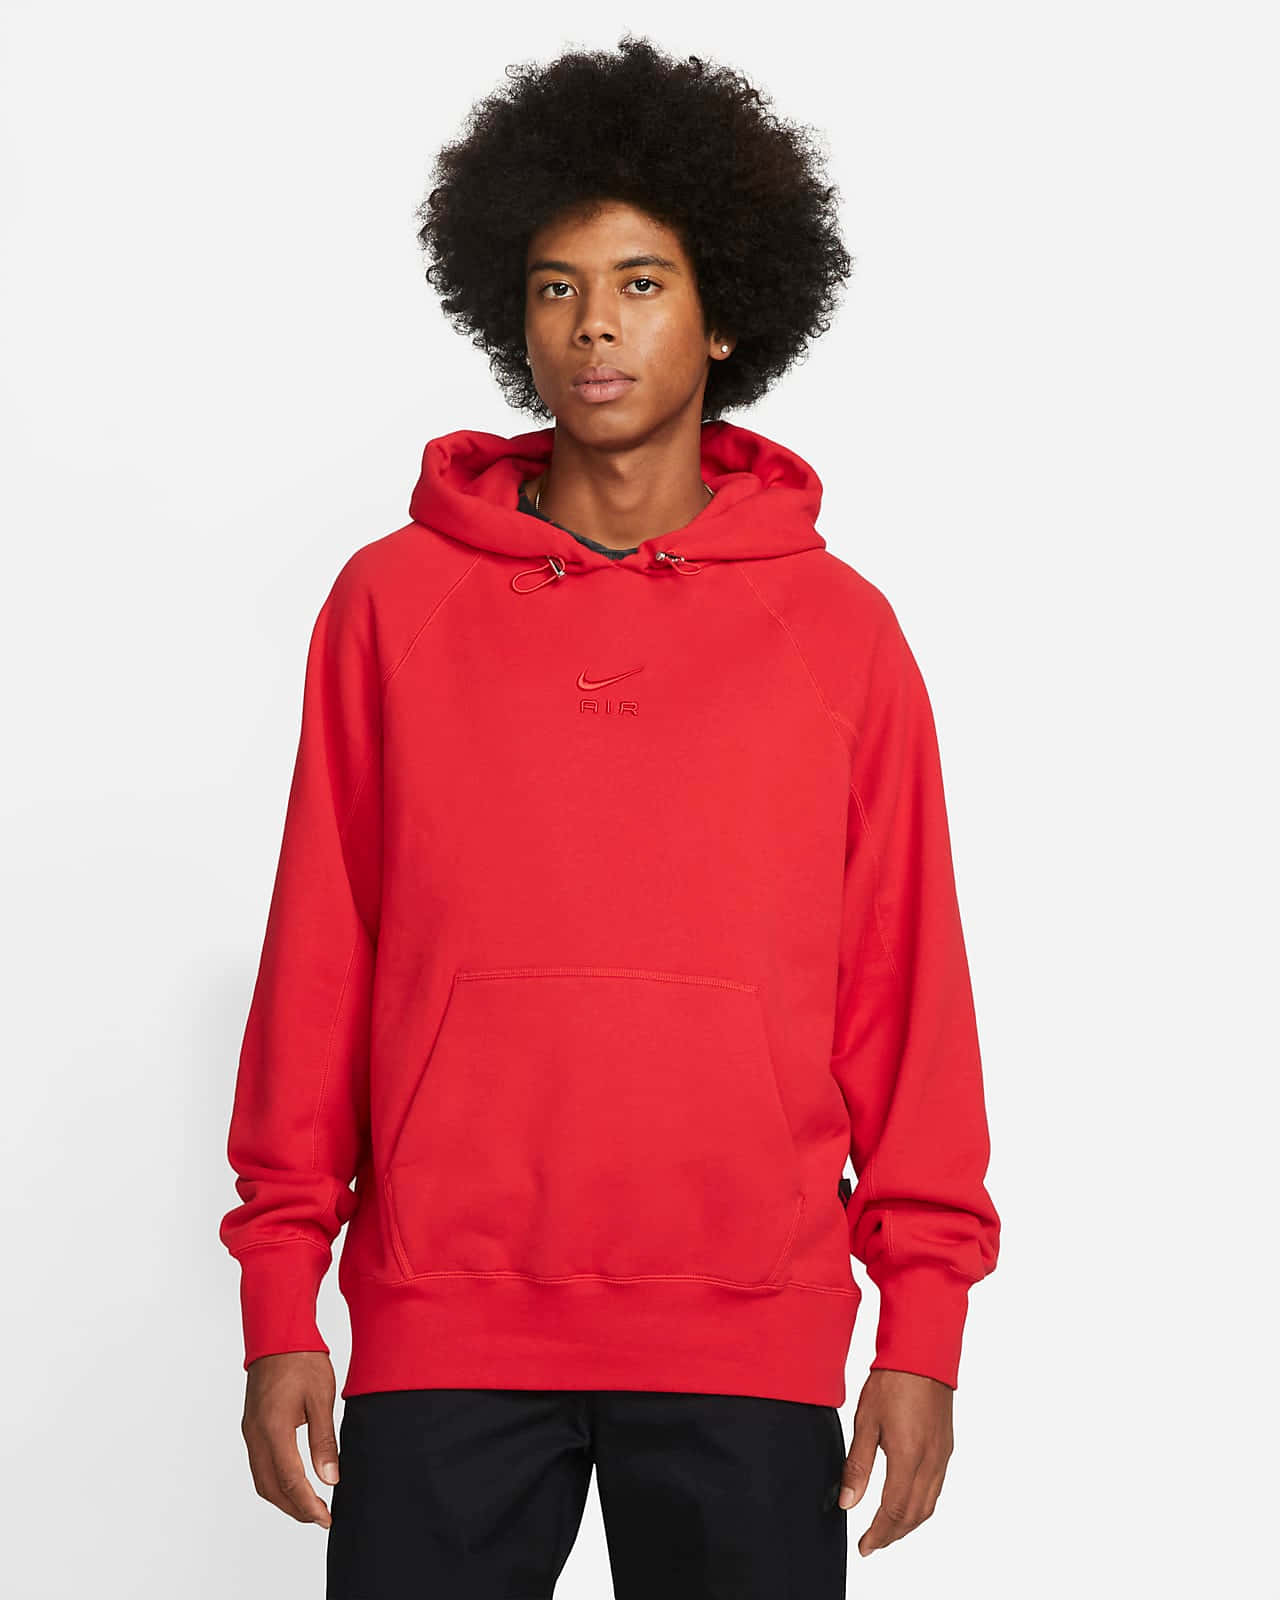 Download Stylish Red Hoodie on Display Wallpaper | Wallpapers.com